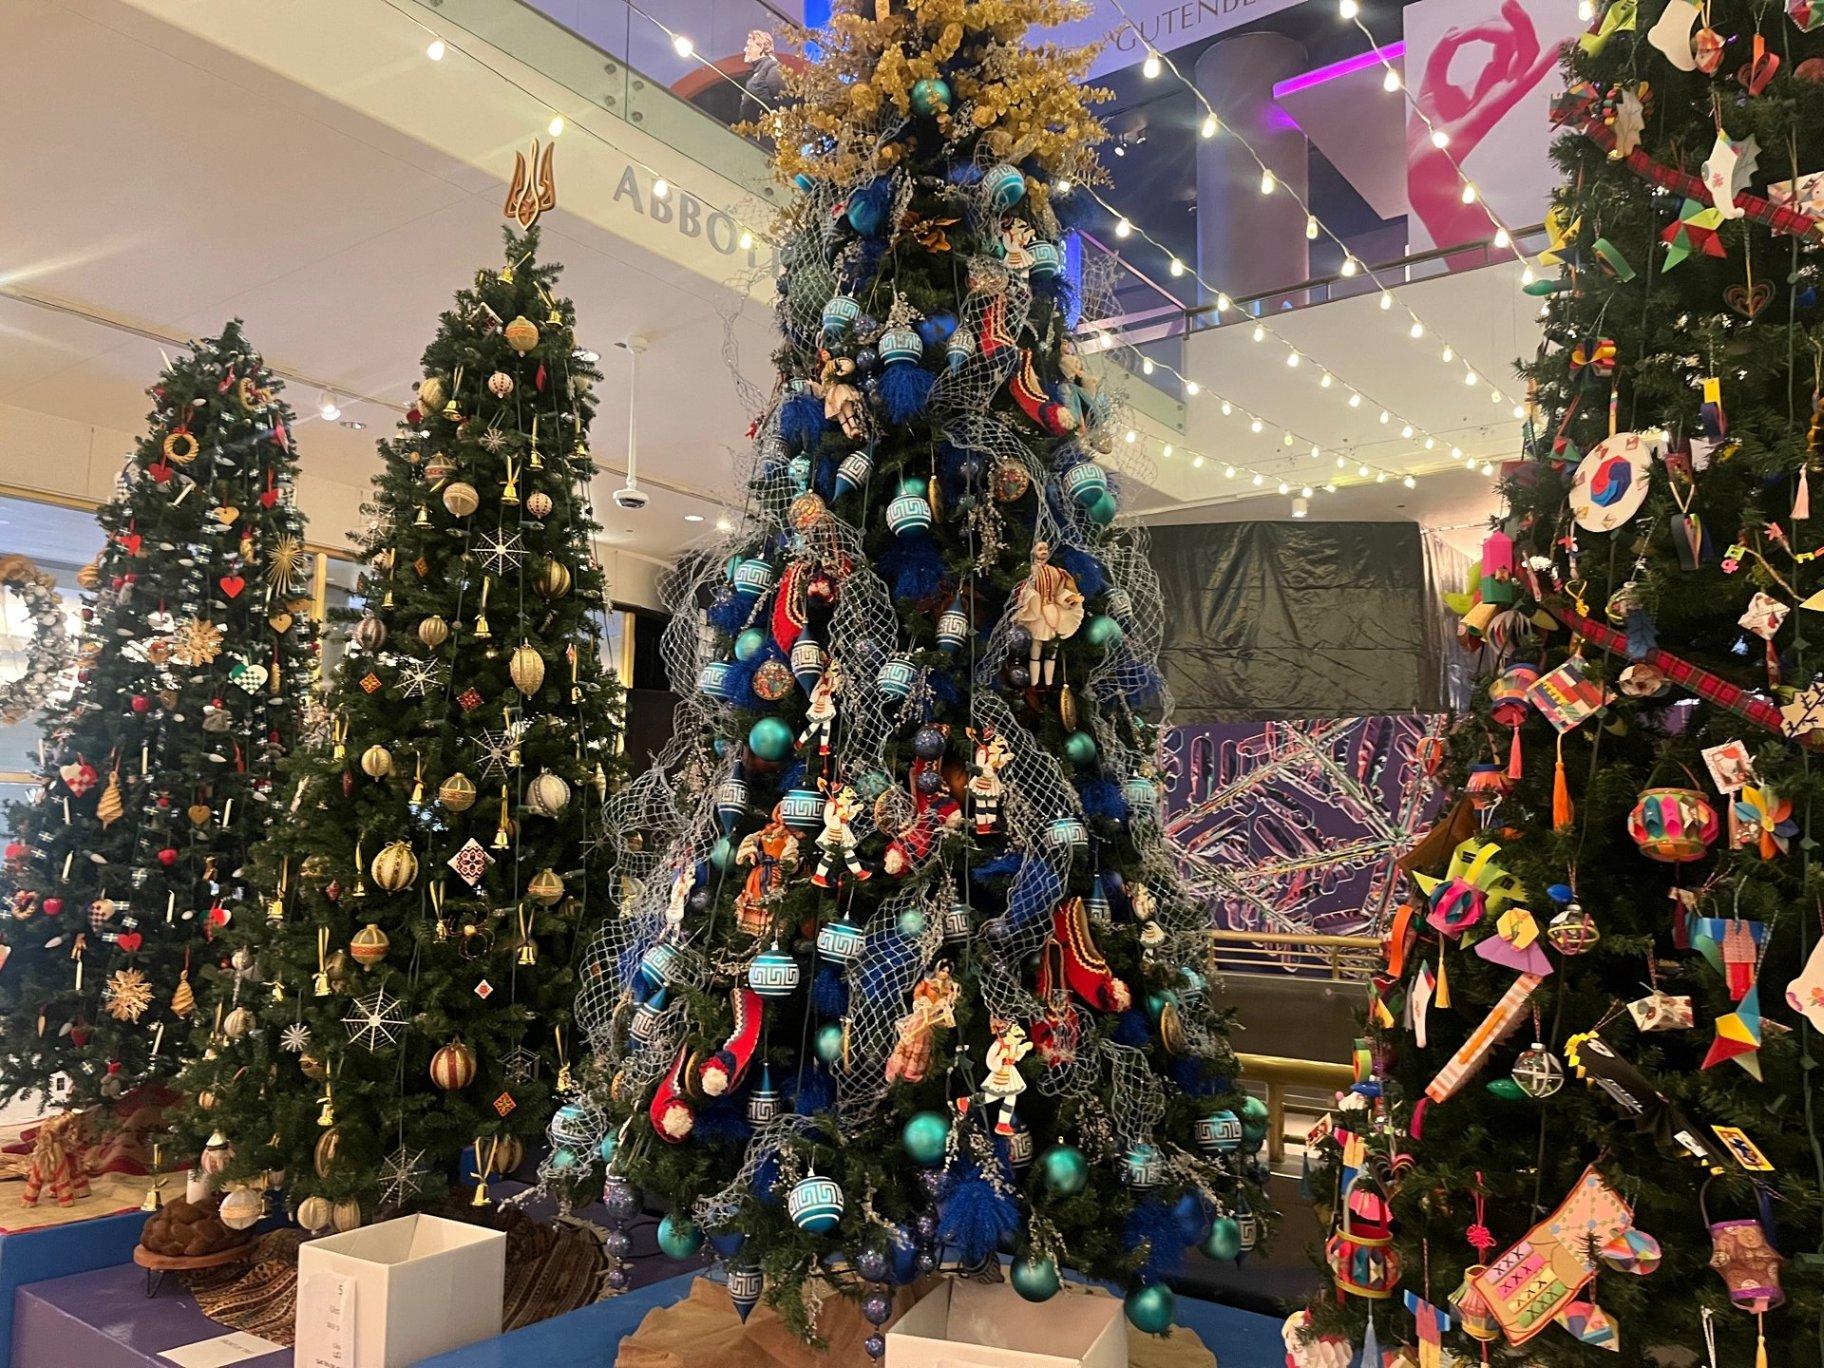 Trees representing different countries are featured at the Museum of Science and Industry. (Angel Idowu / WTTW News)